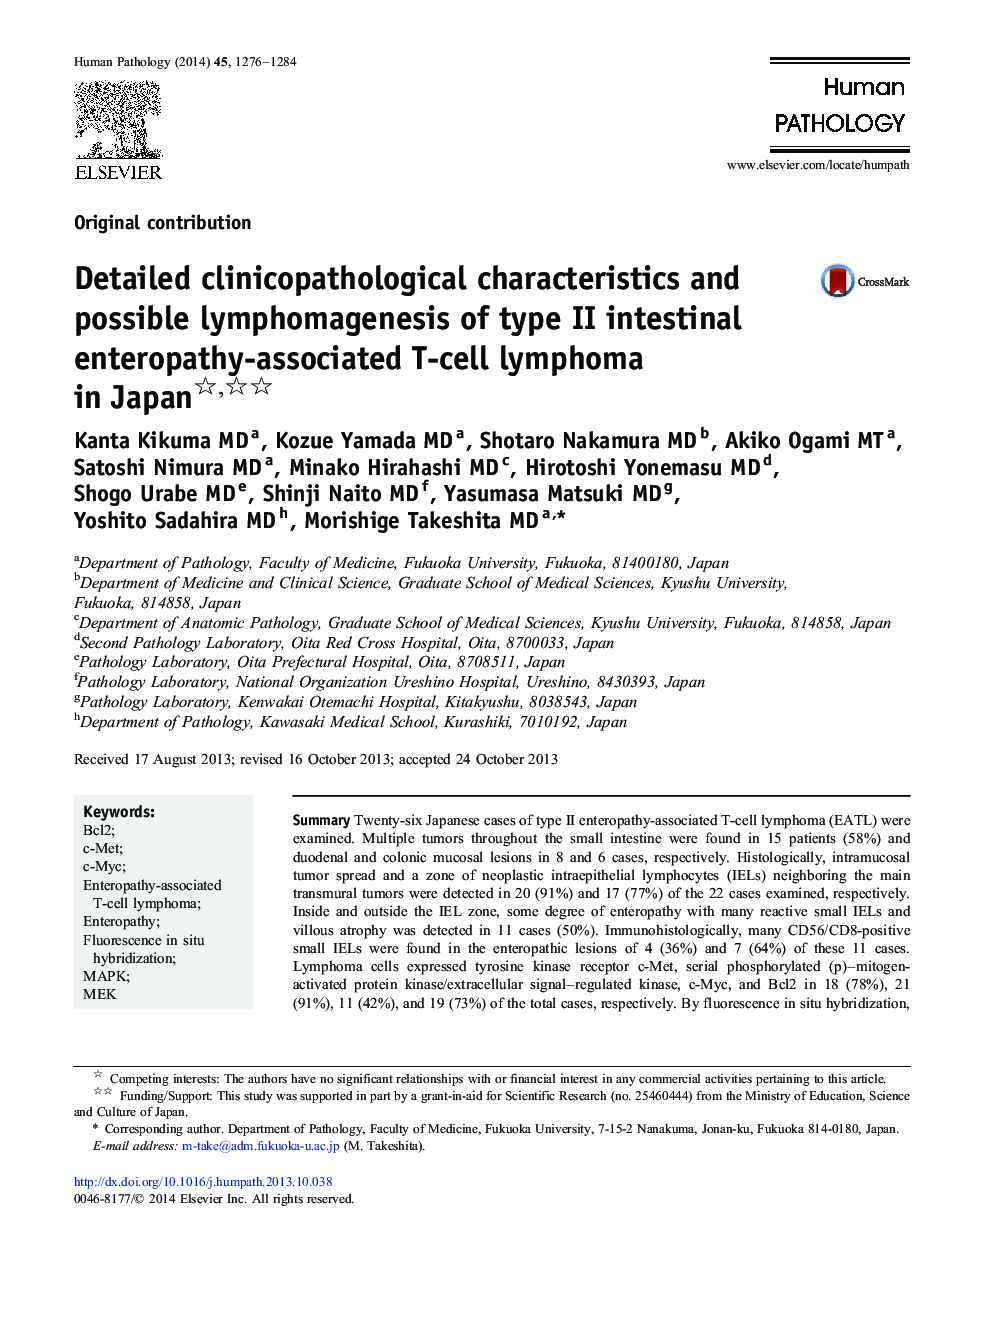 Detailed clinicopathological characteristics and possible lymphomagenesis of type II intestinal enteropathy-associated T-cell lymphoma in Japan